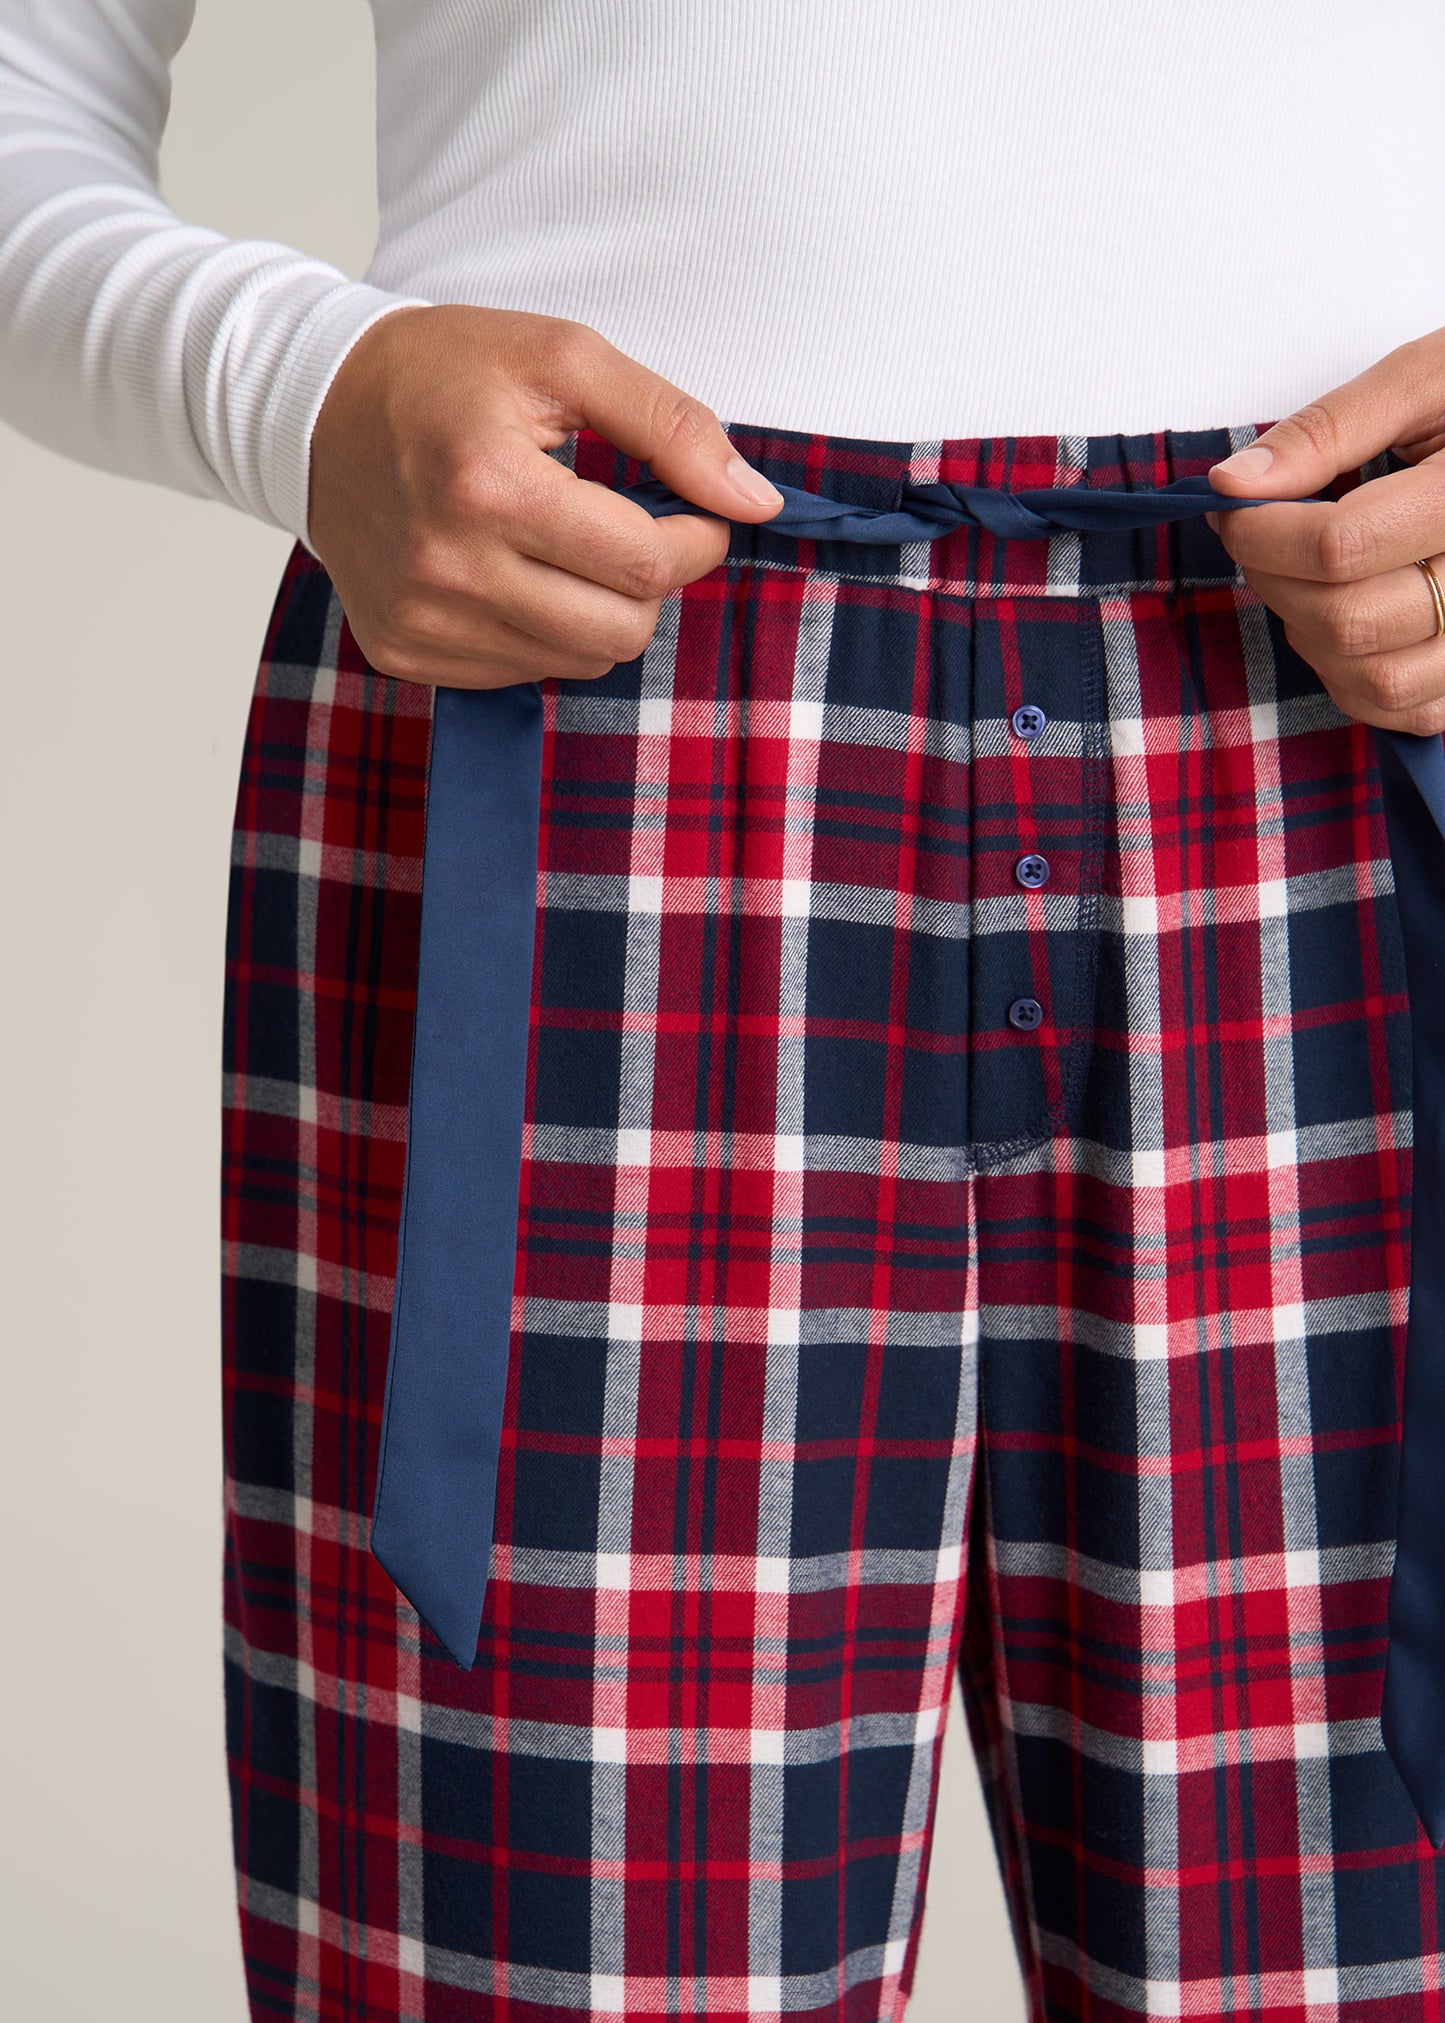 Adr Women's Cotton Flannel Pajama Pants With Pockets Red Buffalo Check  Plaid 2x Large : Target